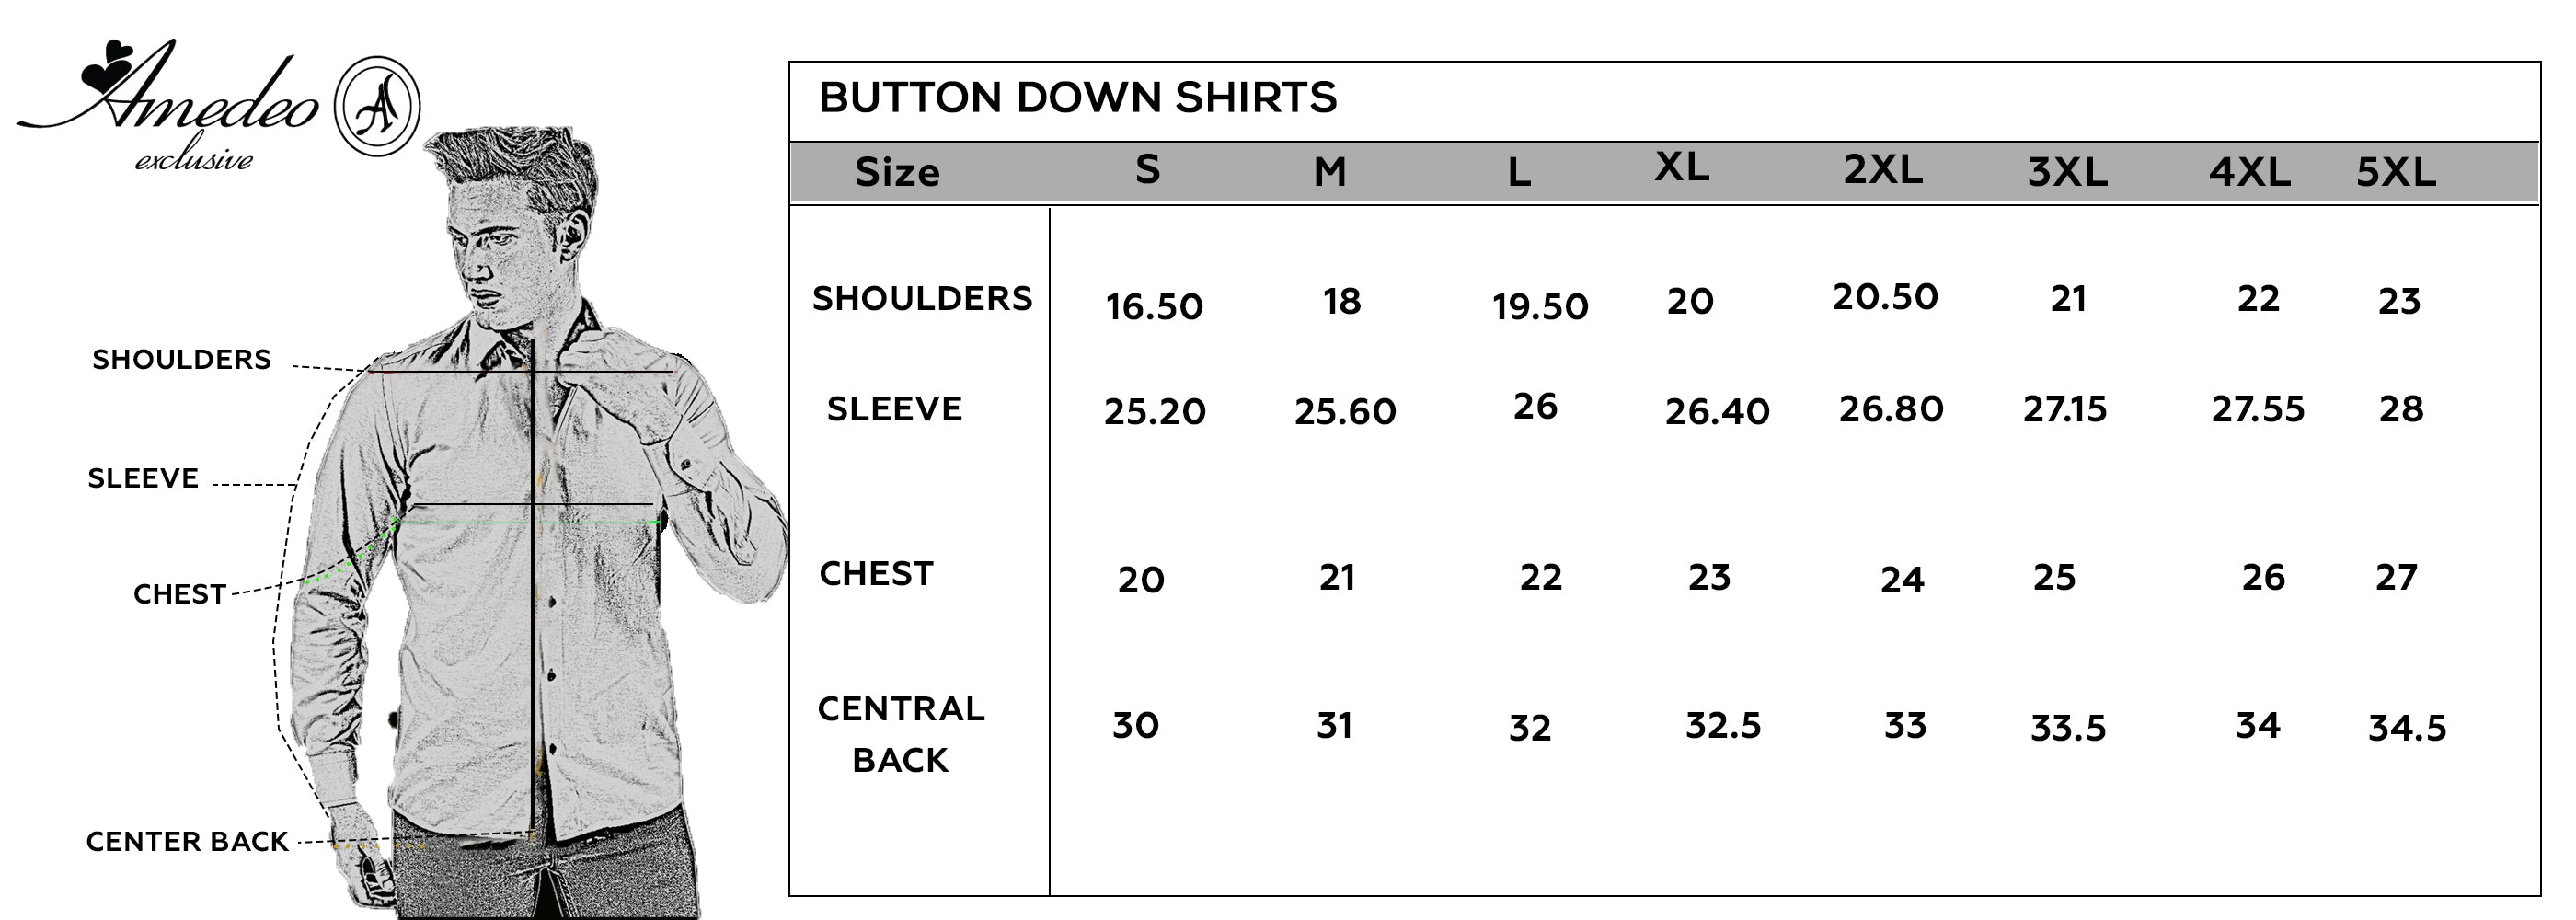 Solid Burgandy Mens Slim Fit Designer Dress Shirt - tailored Cotton Shirts for Work and Casual Wear